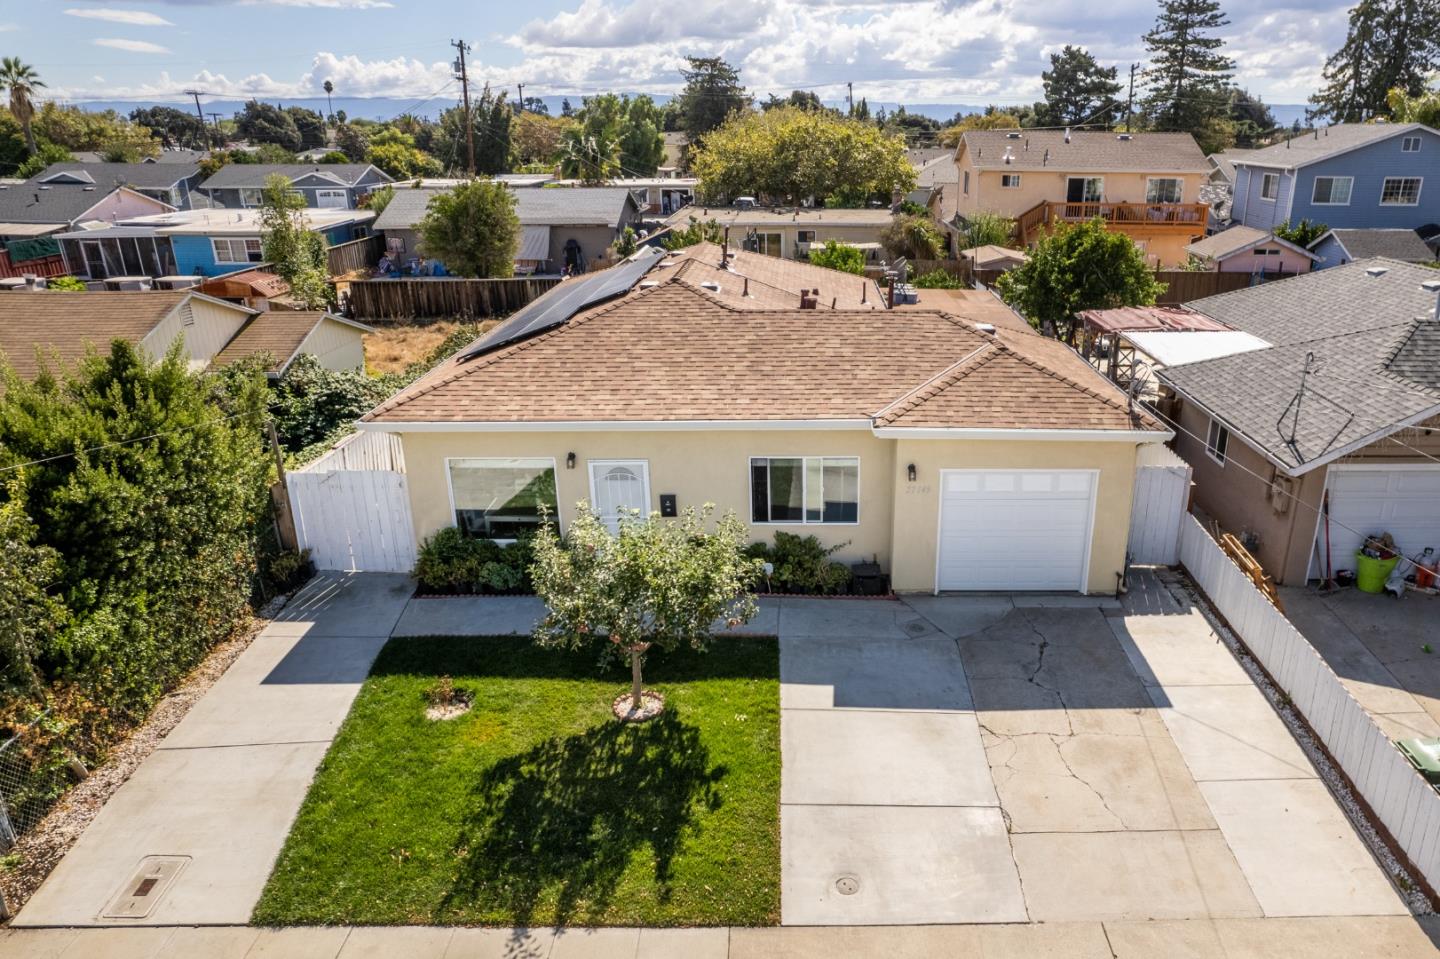 Photo of 37149 Dondero Wy in Fremont, CA